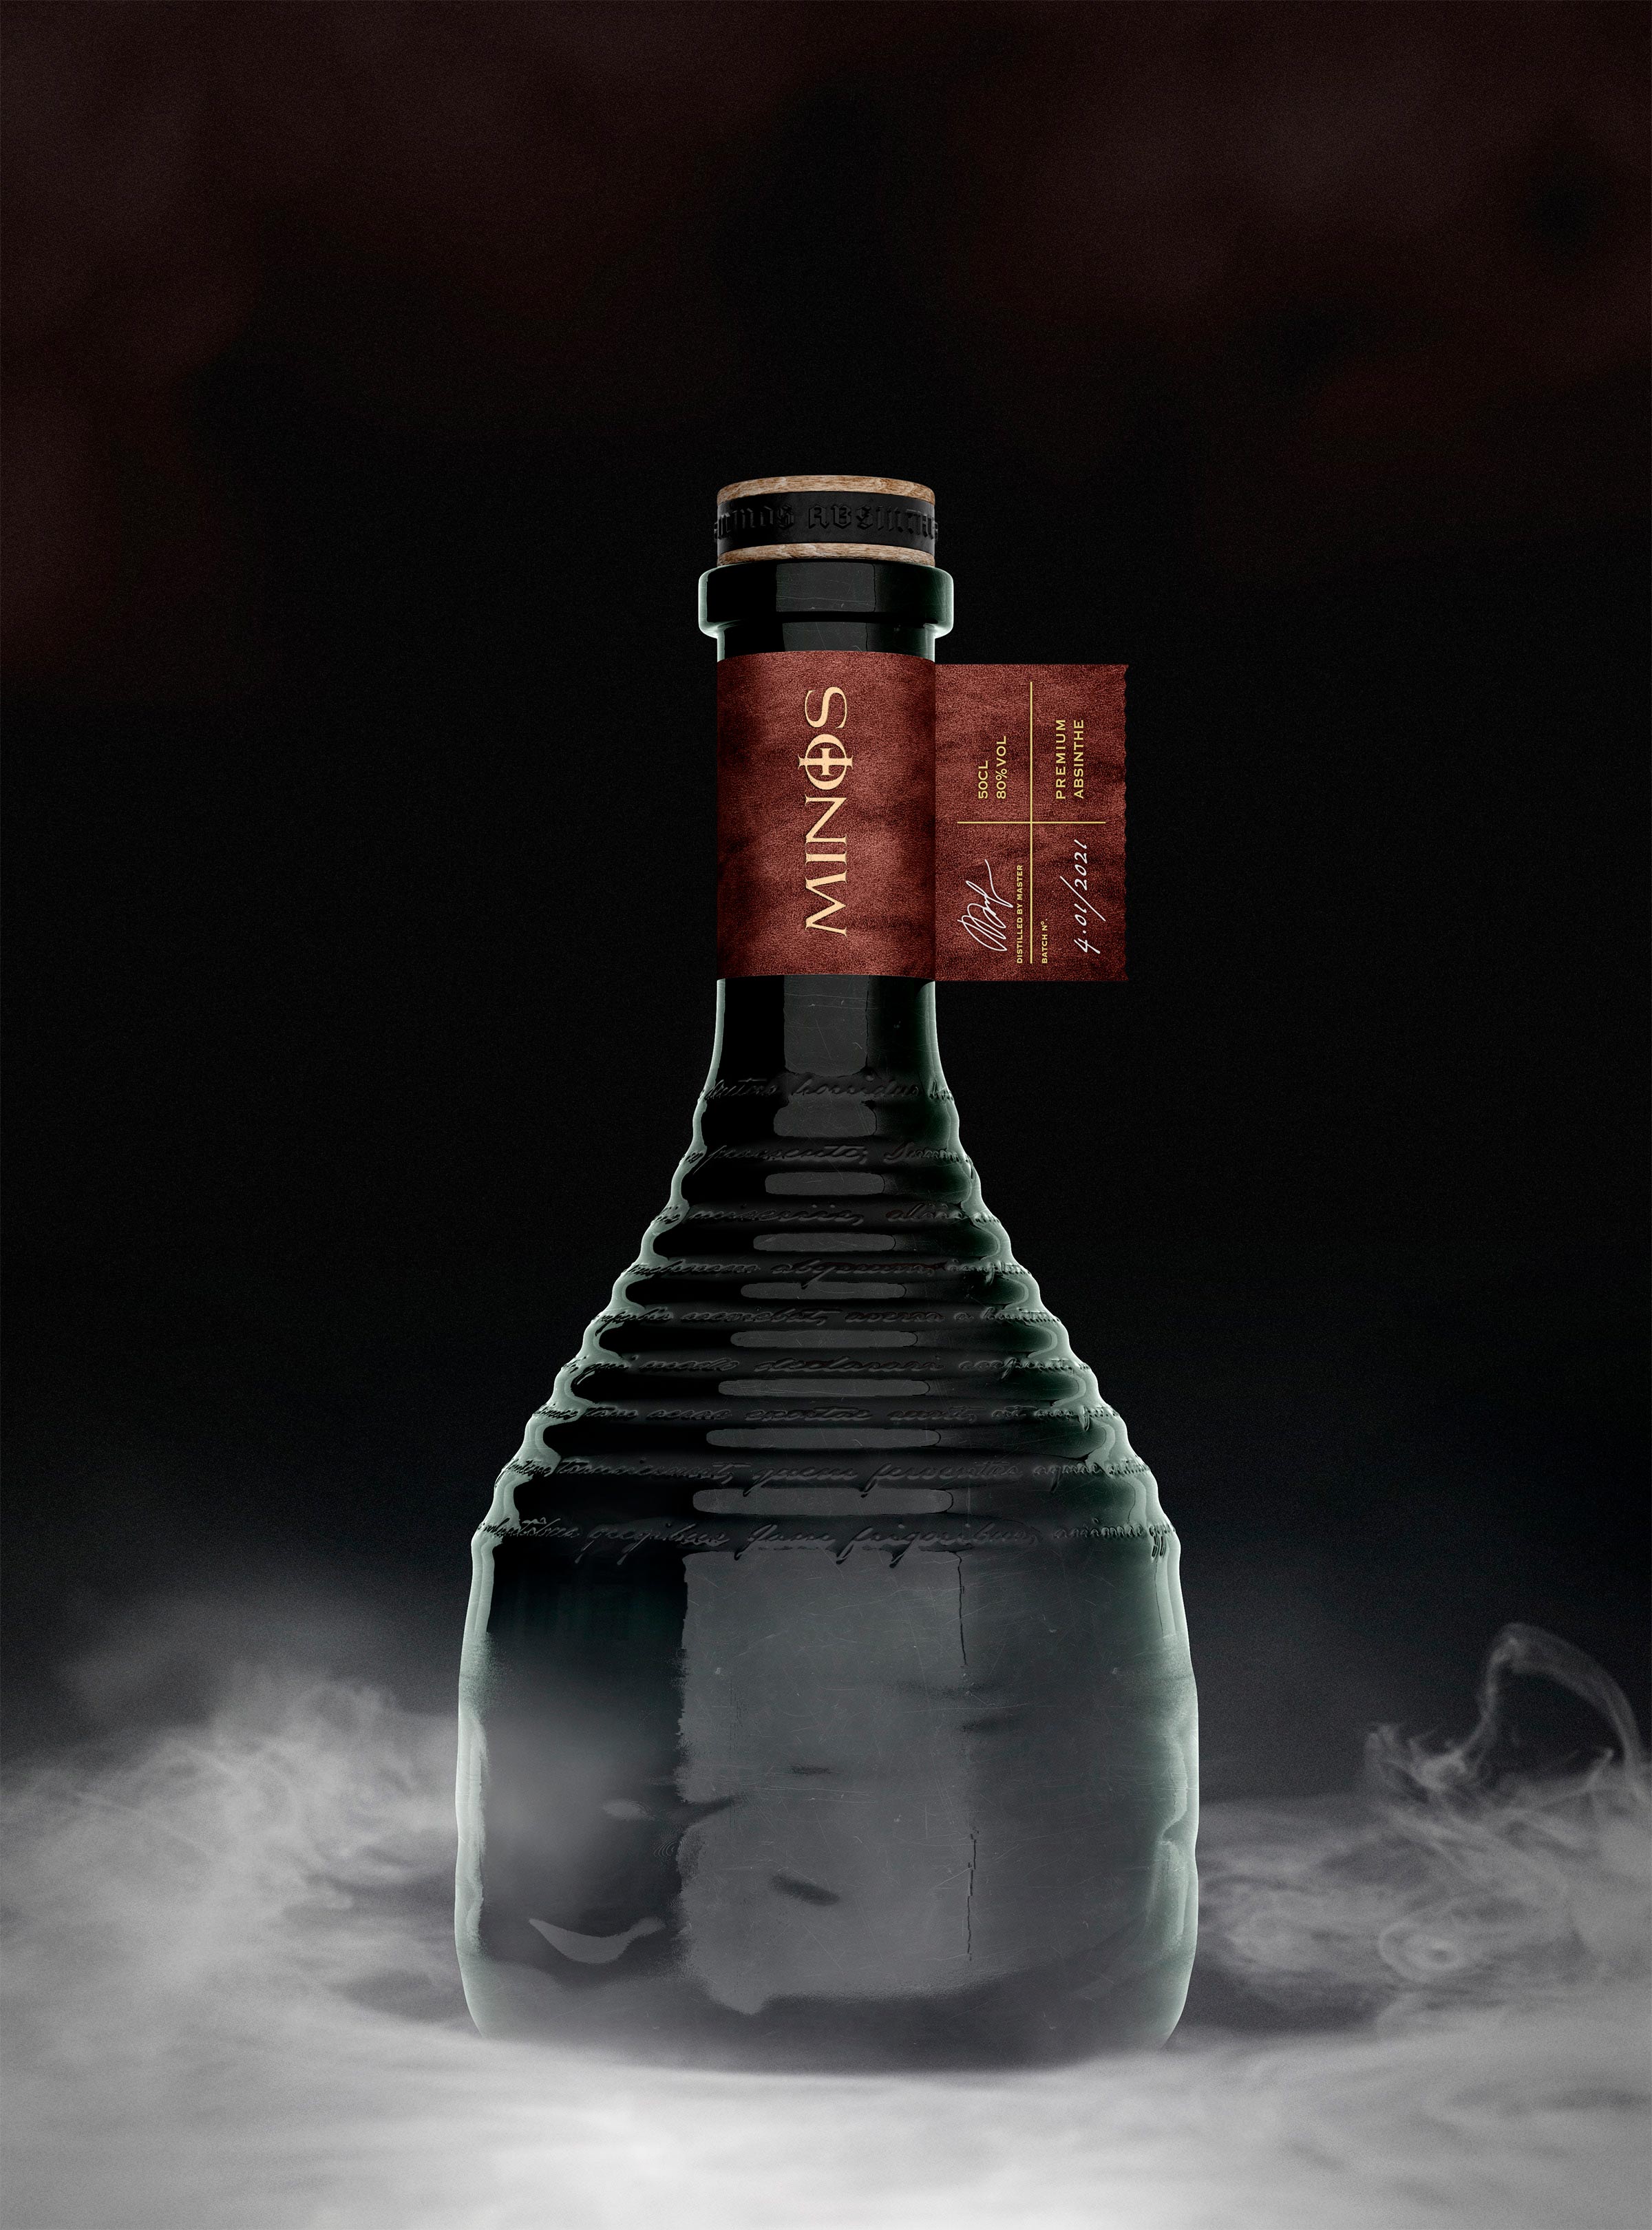 C.Carbon Signed the Bottle and Packaging Design for a Brand New Premium Absinthe